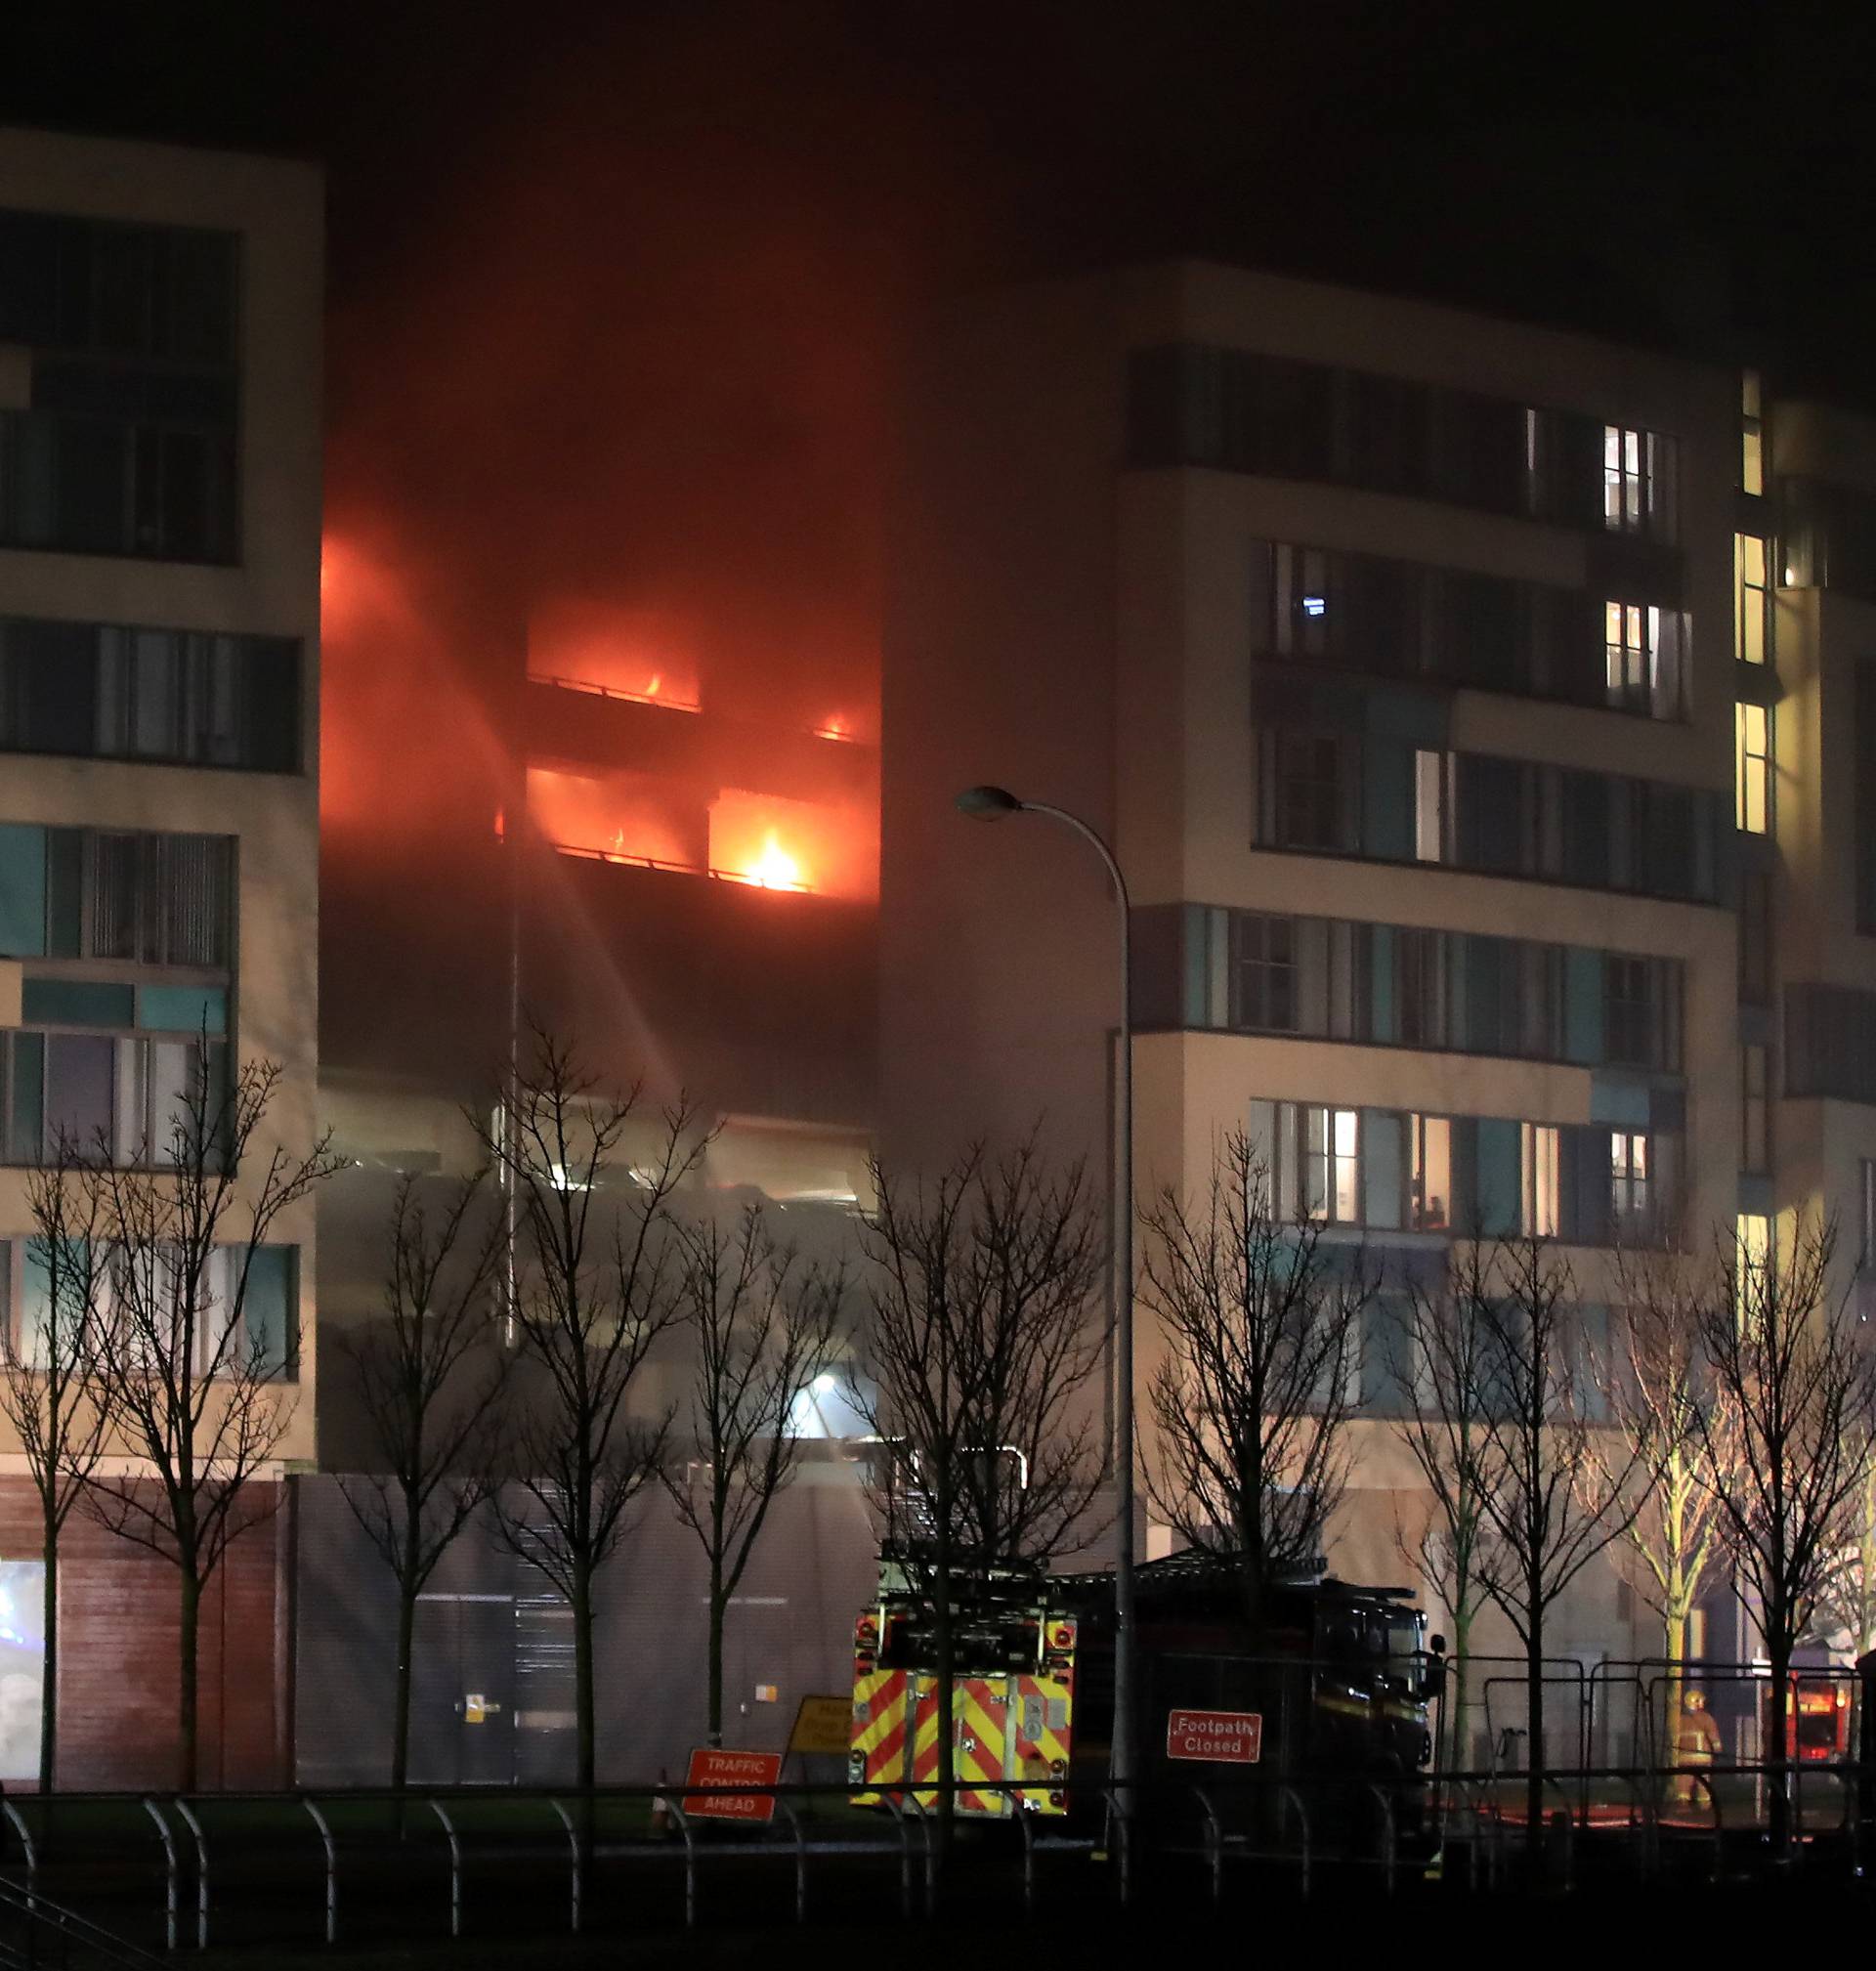 Firefighters tackle a fire during a serious blaze in a multi-storey car park in Liverpool, Britain.